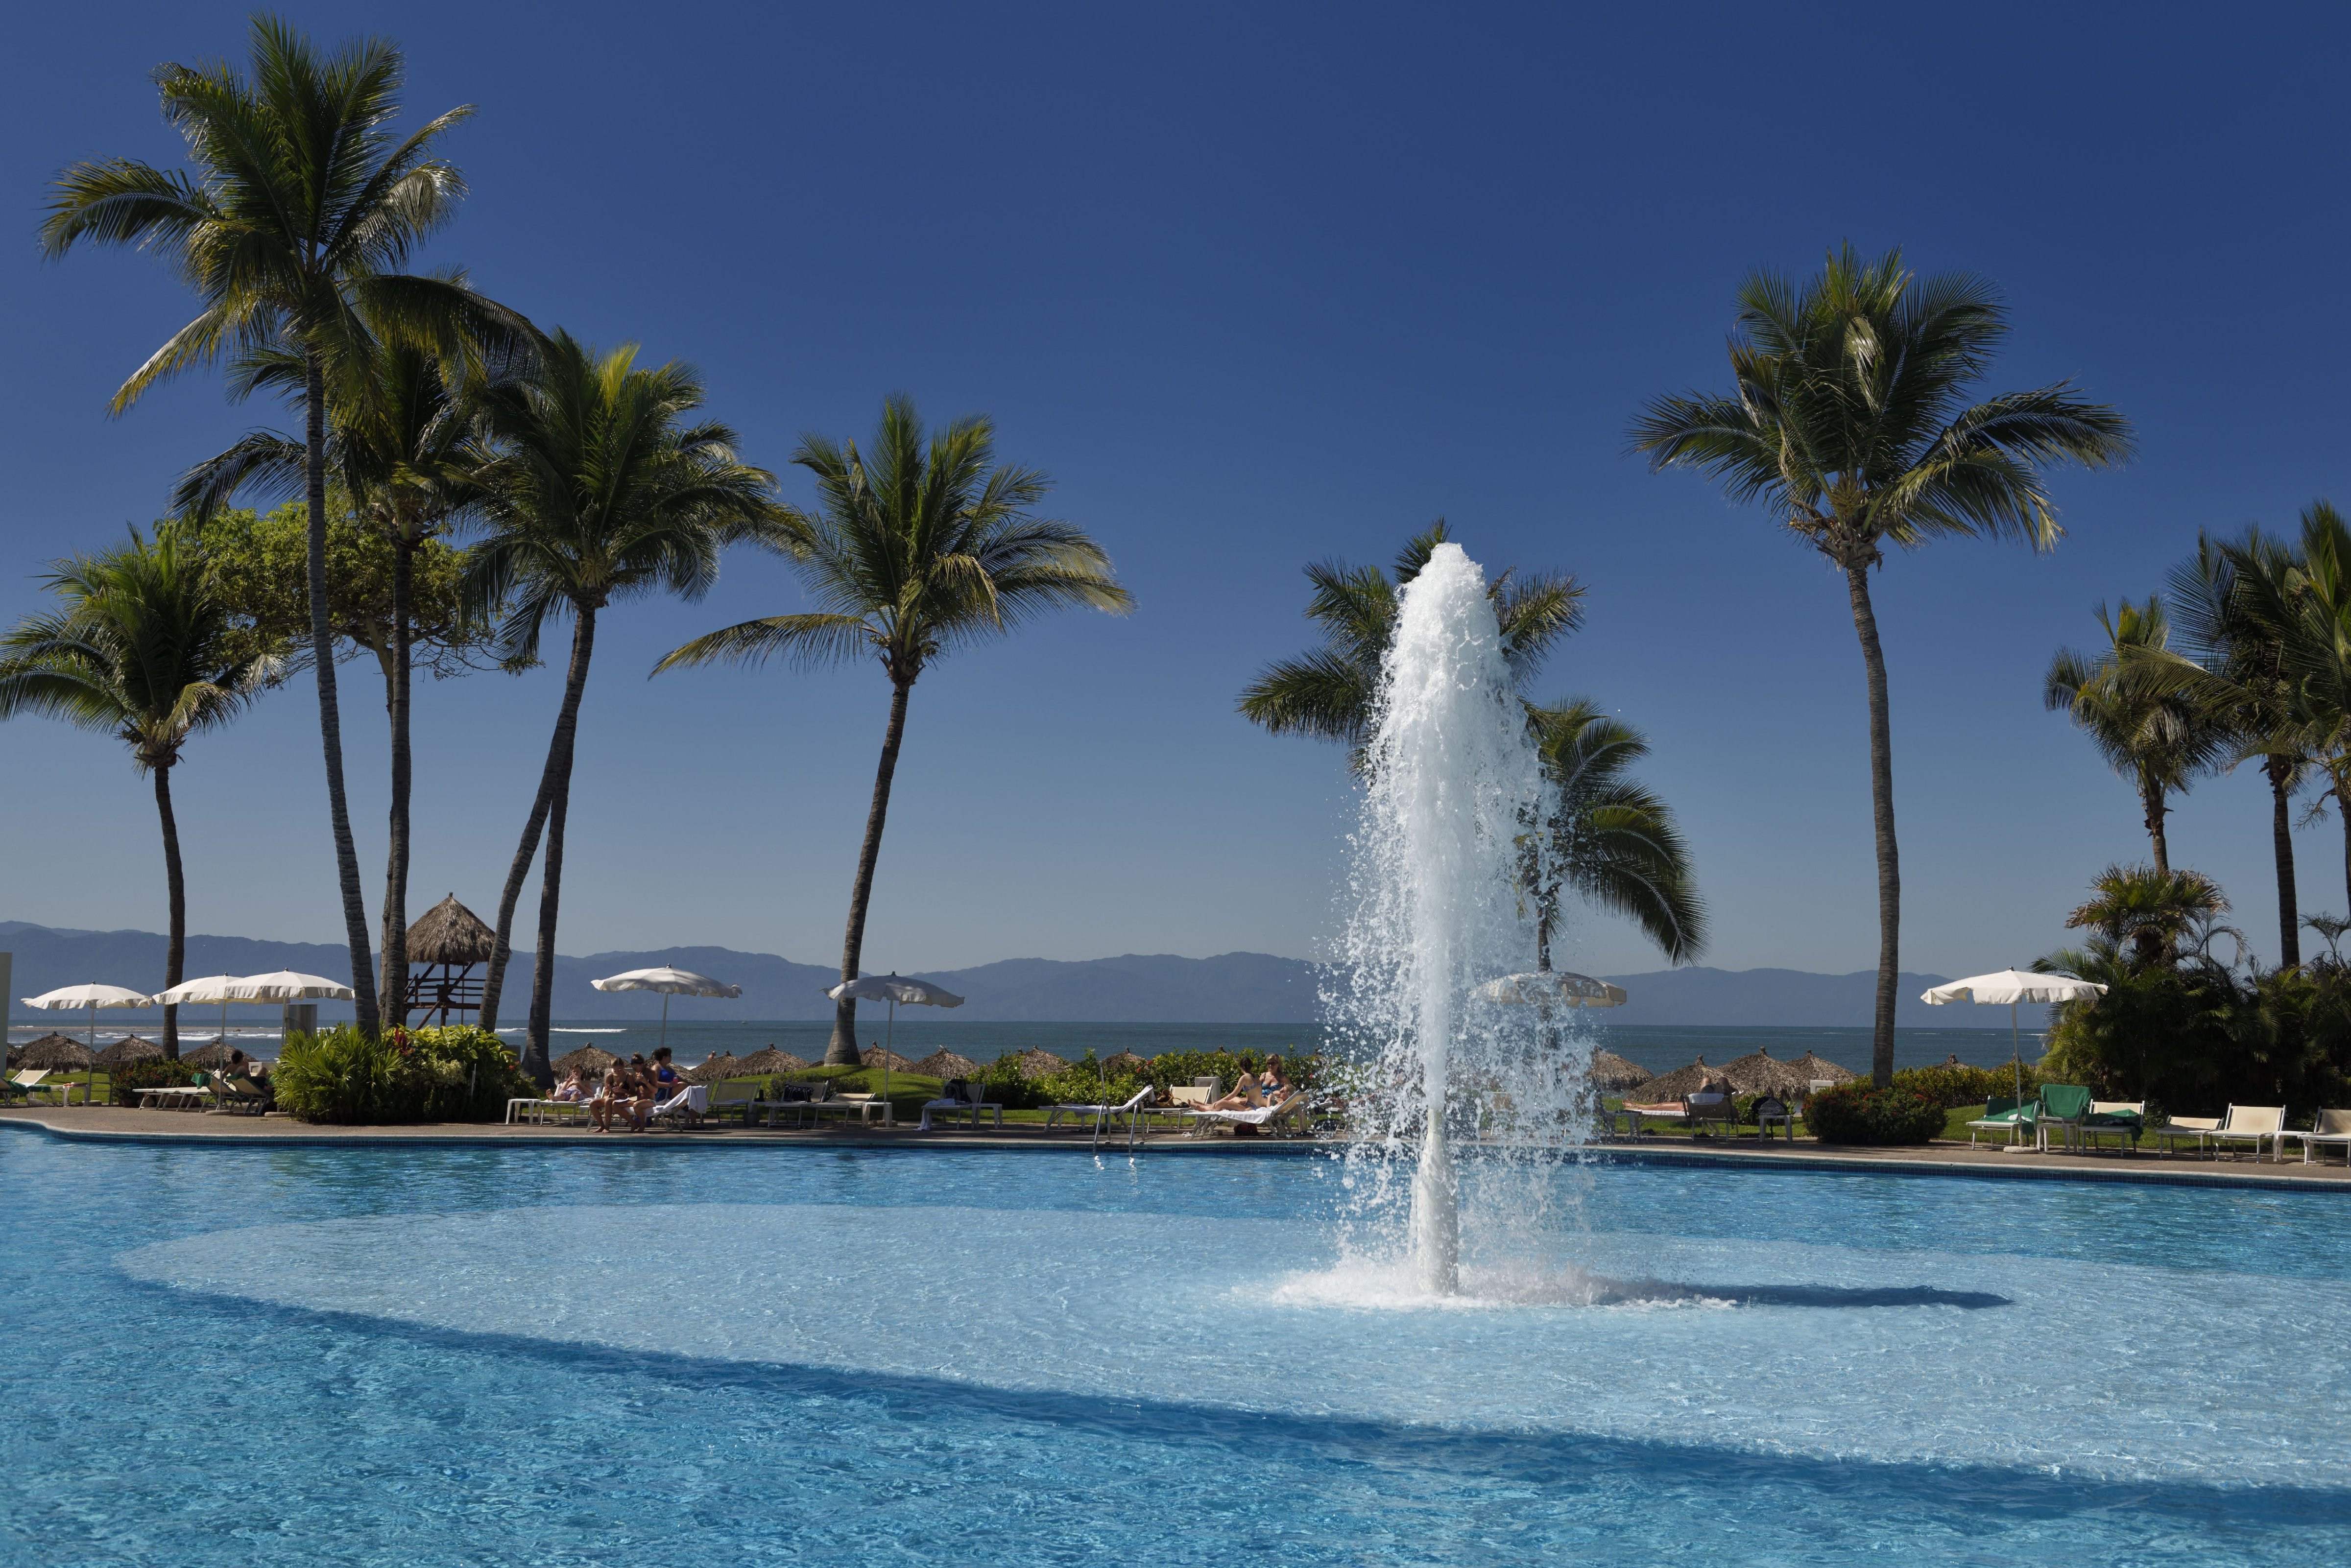 Pool with fountain at Nuevo Vallarta Mexico with Palm trees and vacationers. (Education Images&mdash;UIG via Getty Images)